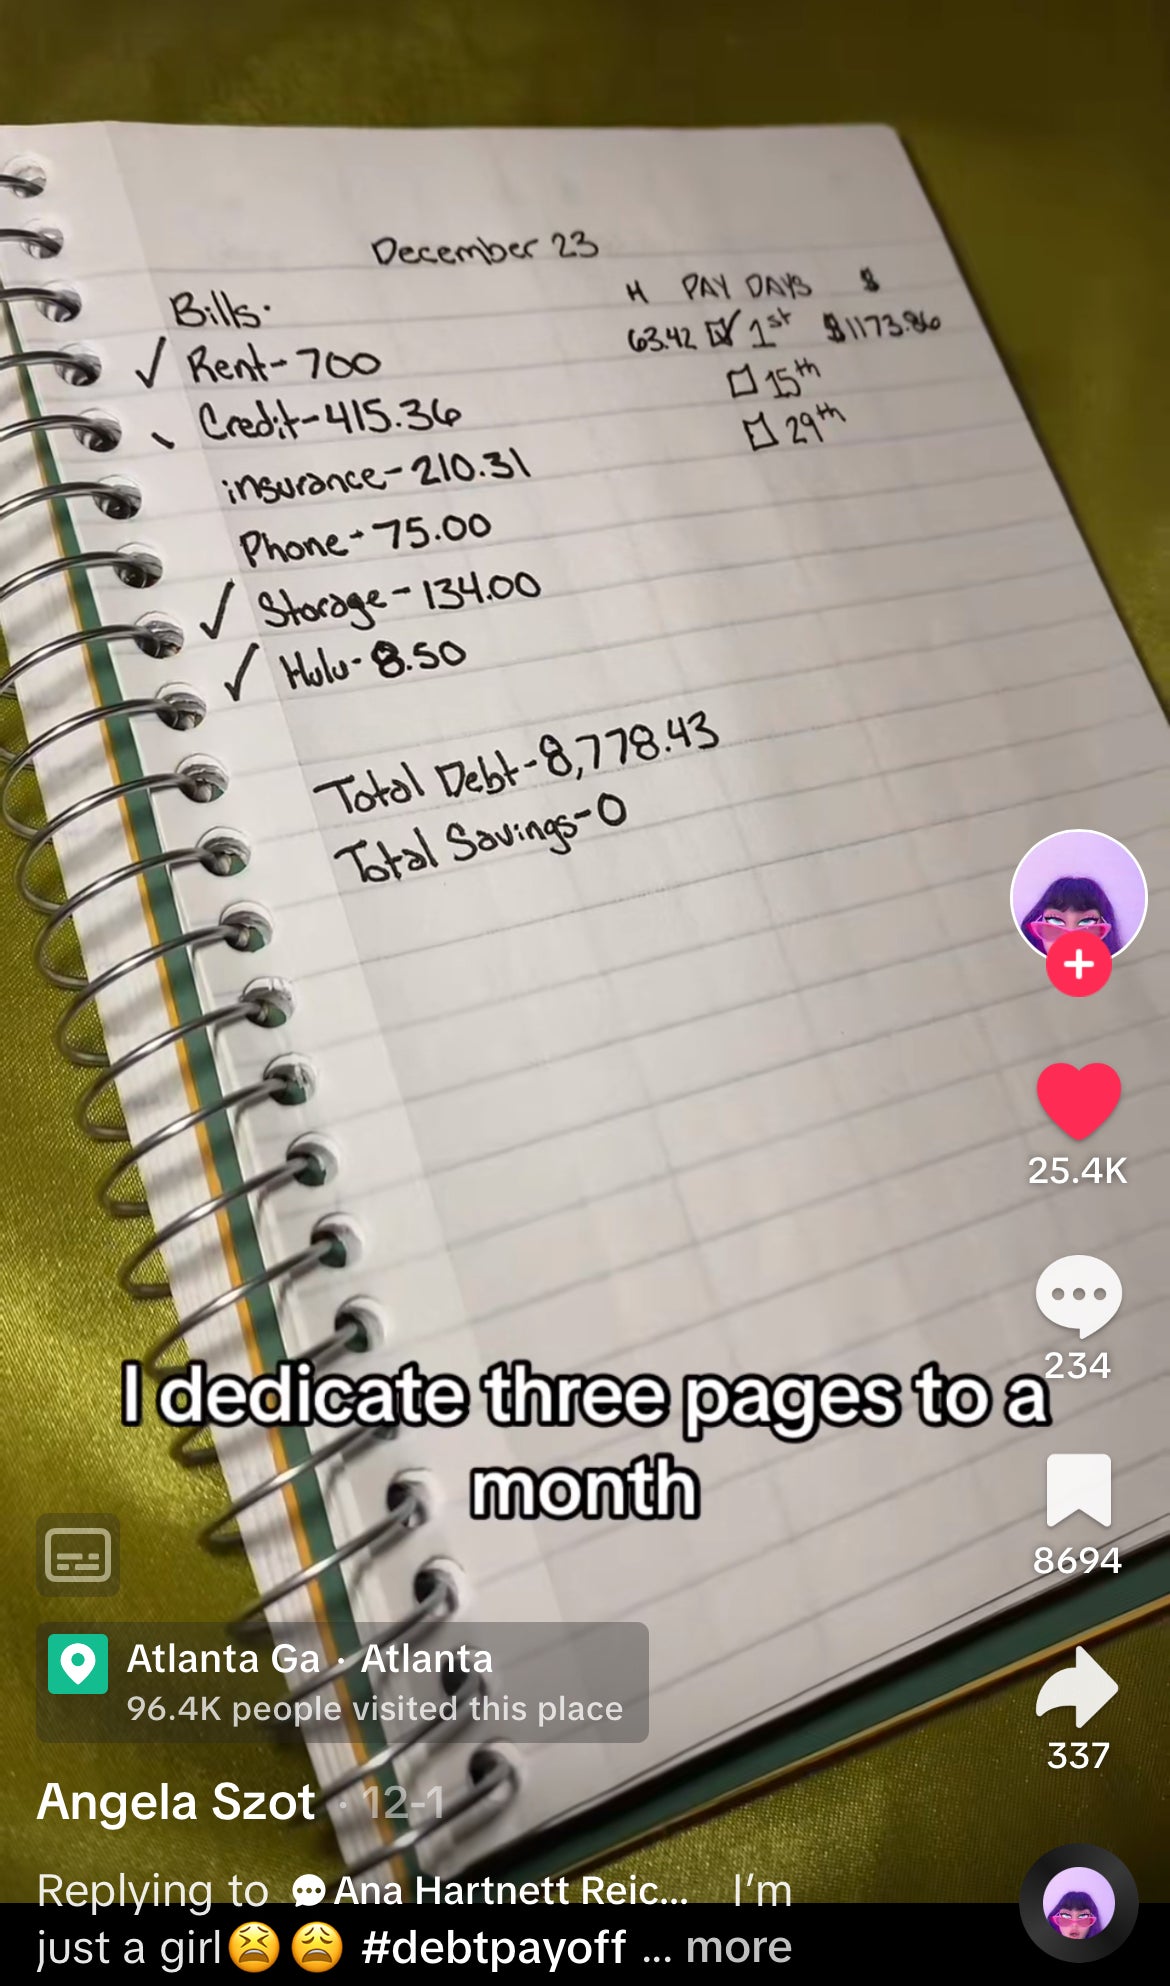 Angela&#x27;s notebook open to the page for December 23, with bills, pay dates, total debt, and savings